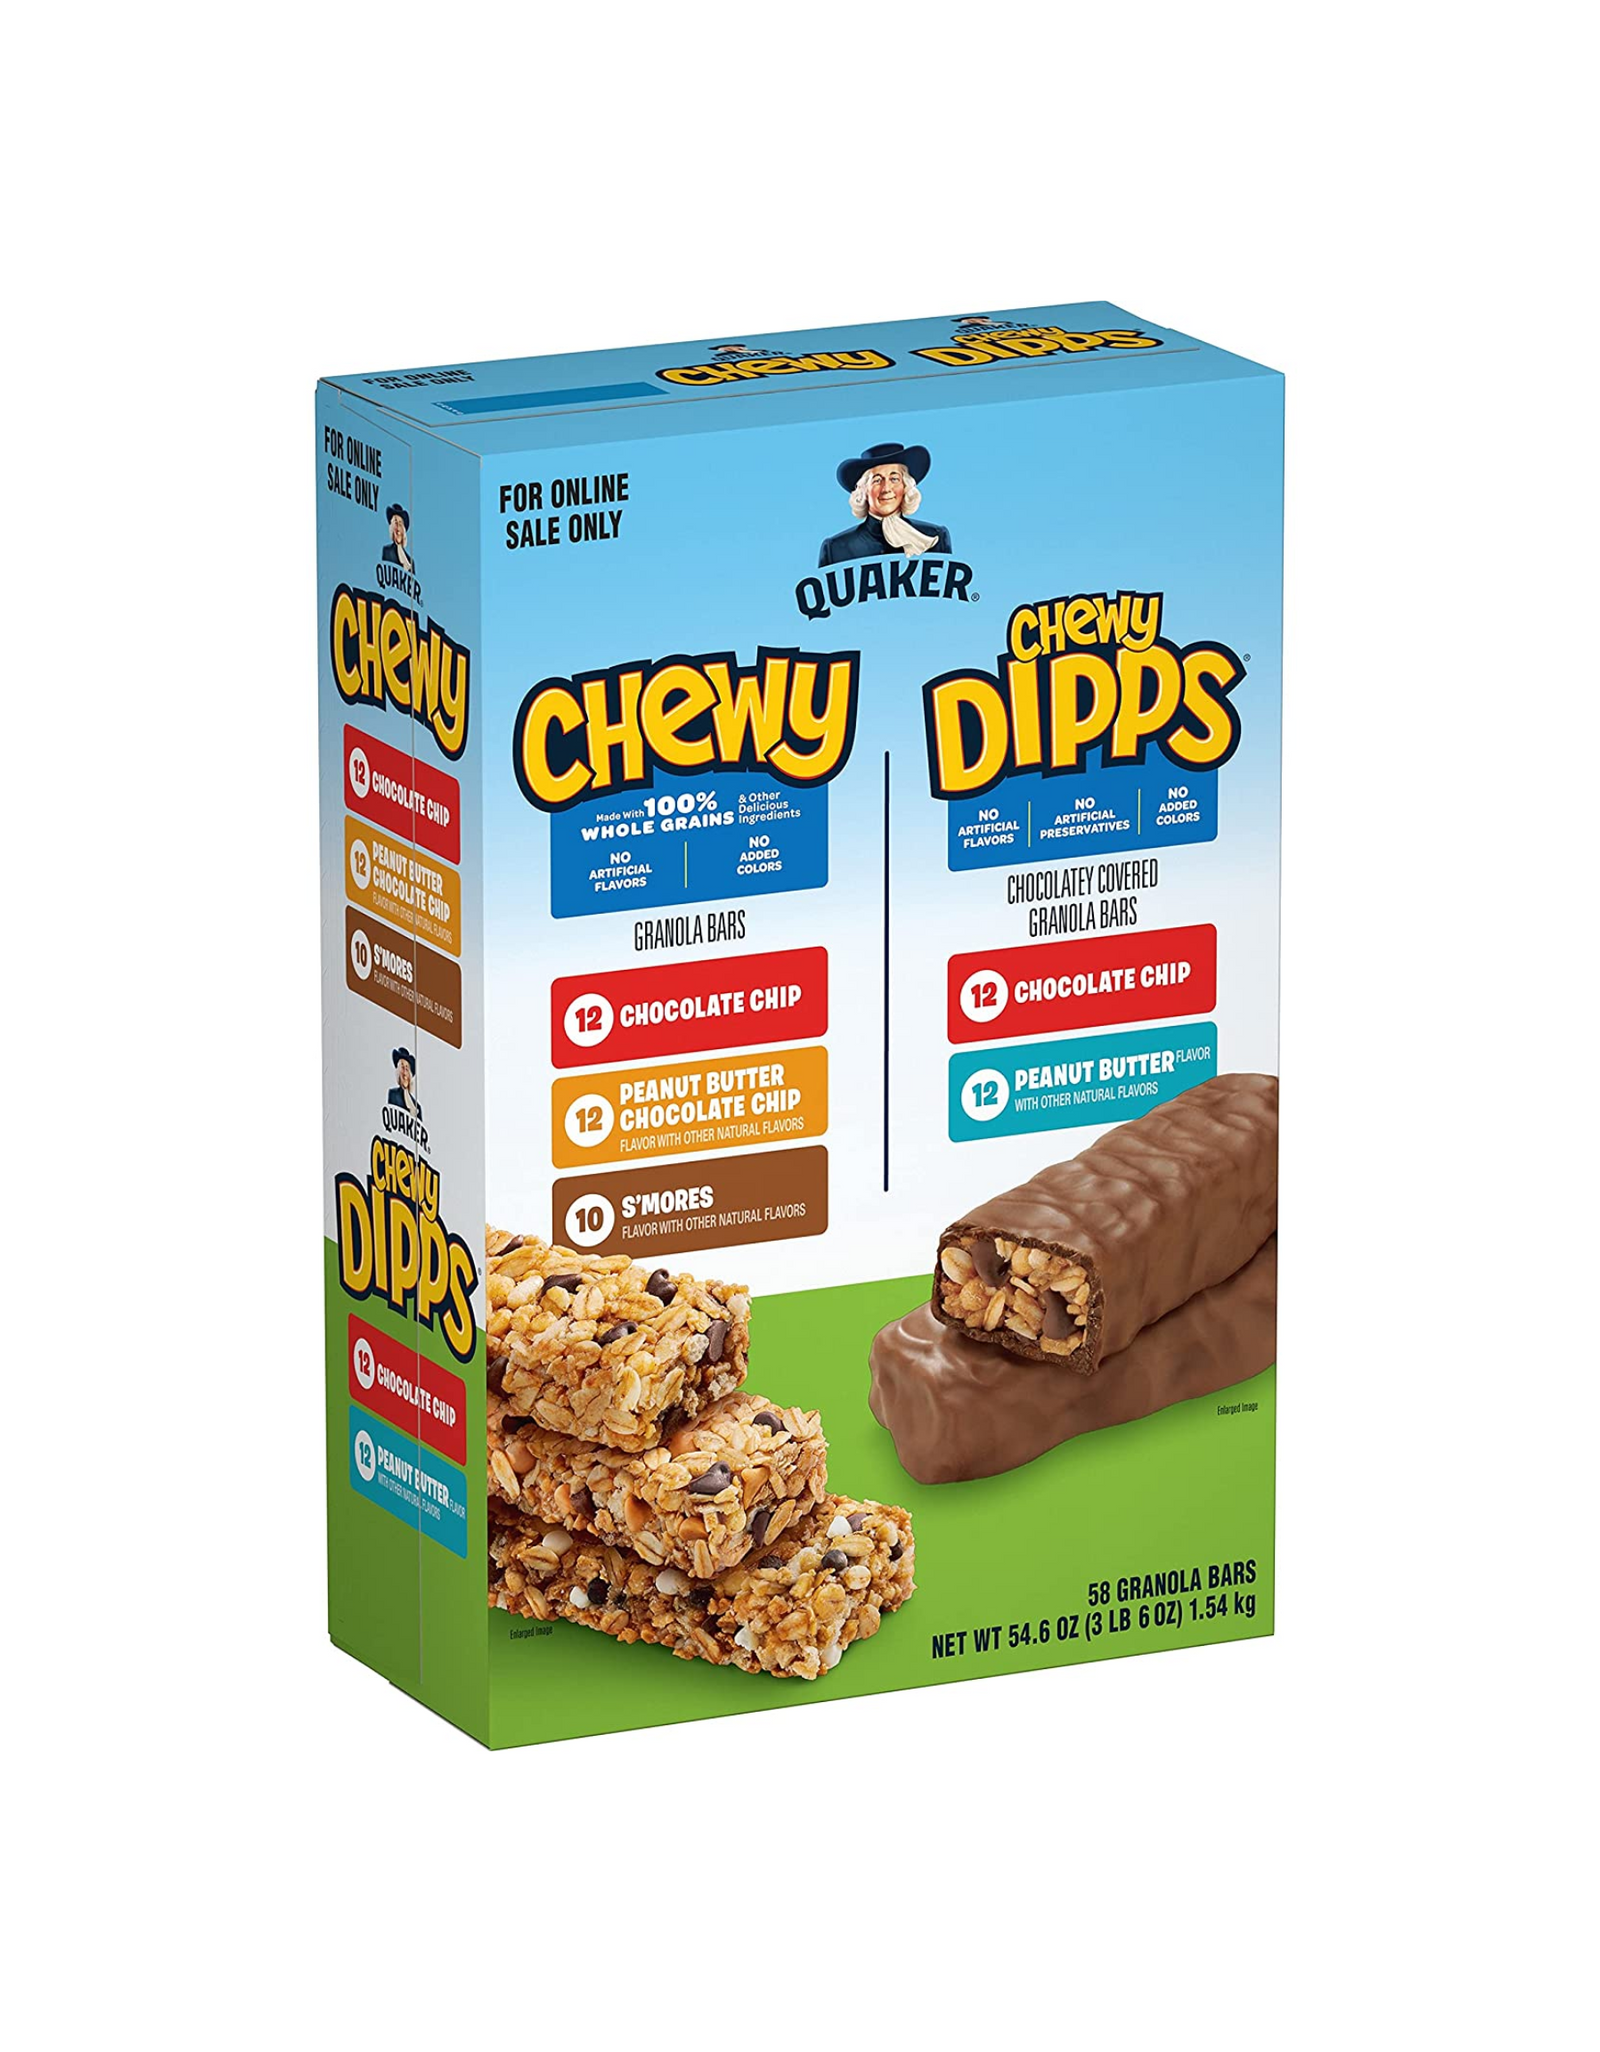 Quaker Chewy Granola Bars, Chewy & Dipps Variety Pack, 0.84 oz each bar (58 Bars)